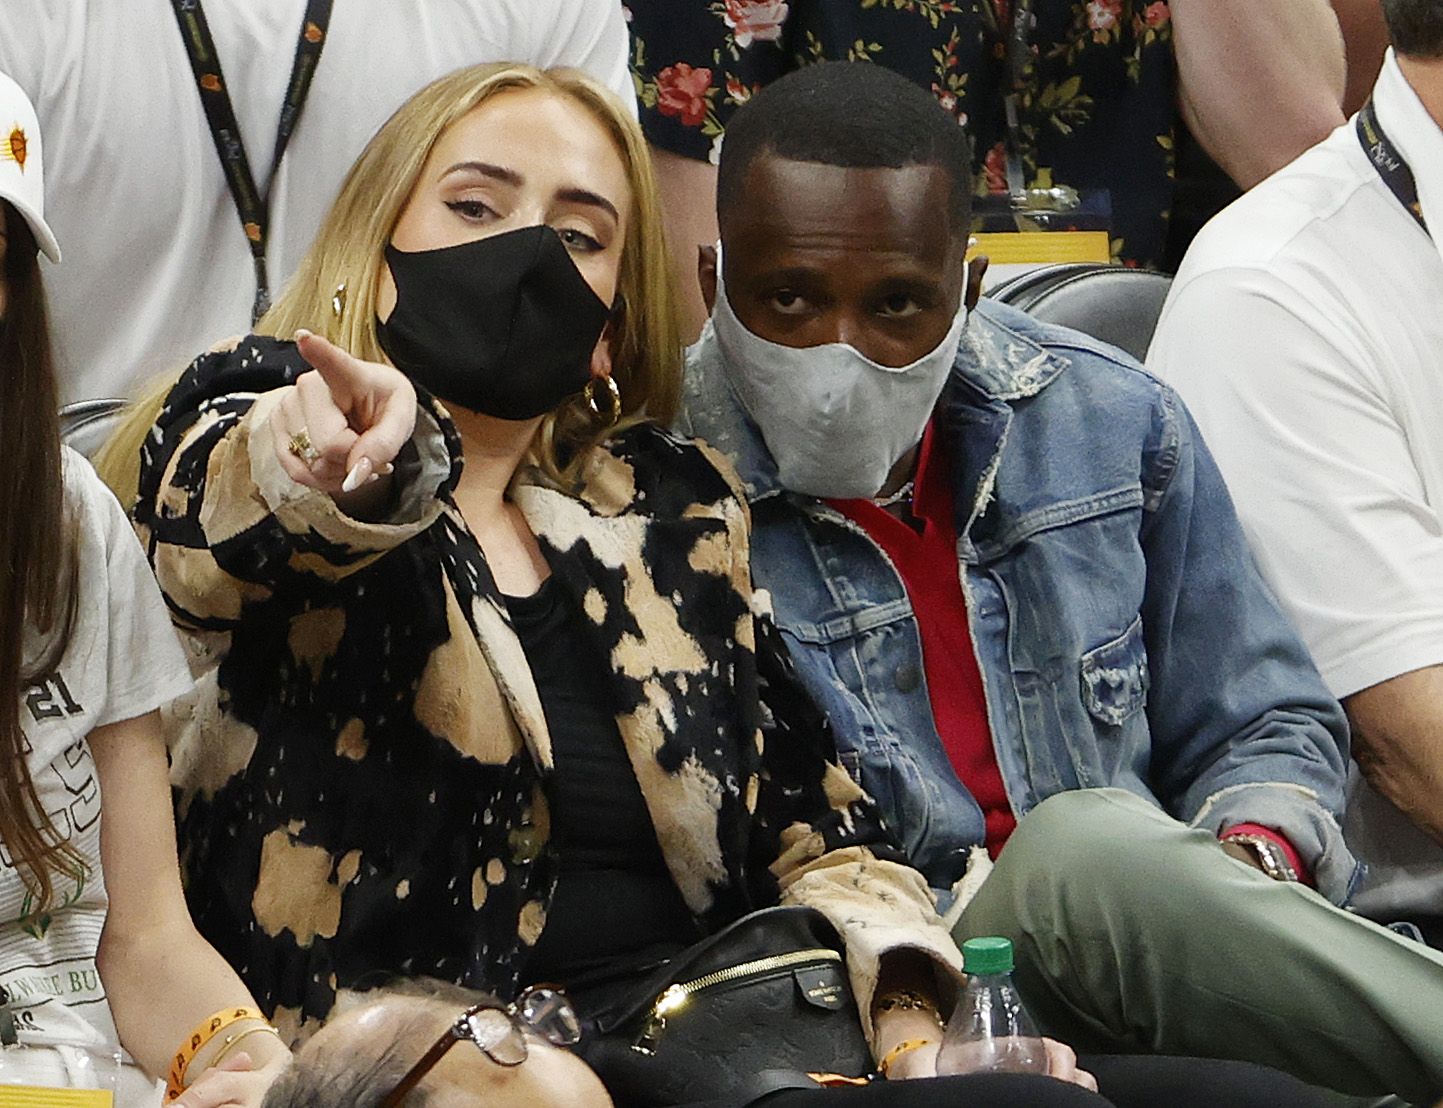 Adele And Rich Paul Lebron James's Manager Are Official In A Relationship Confirmed BY The Singer On Instagram!